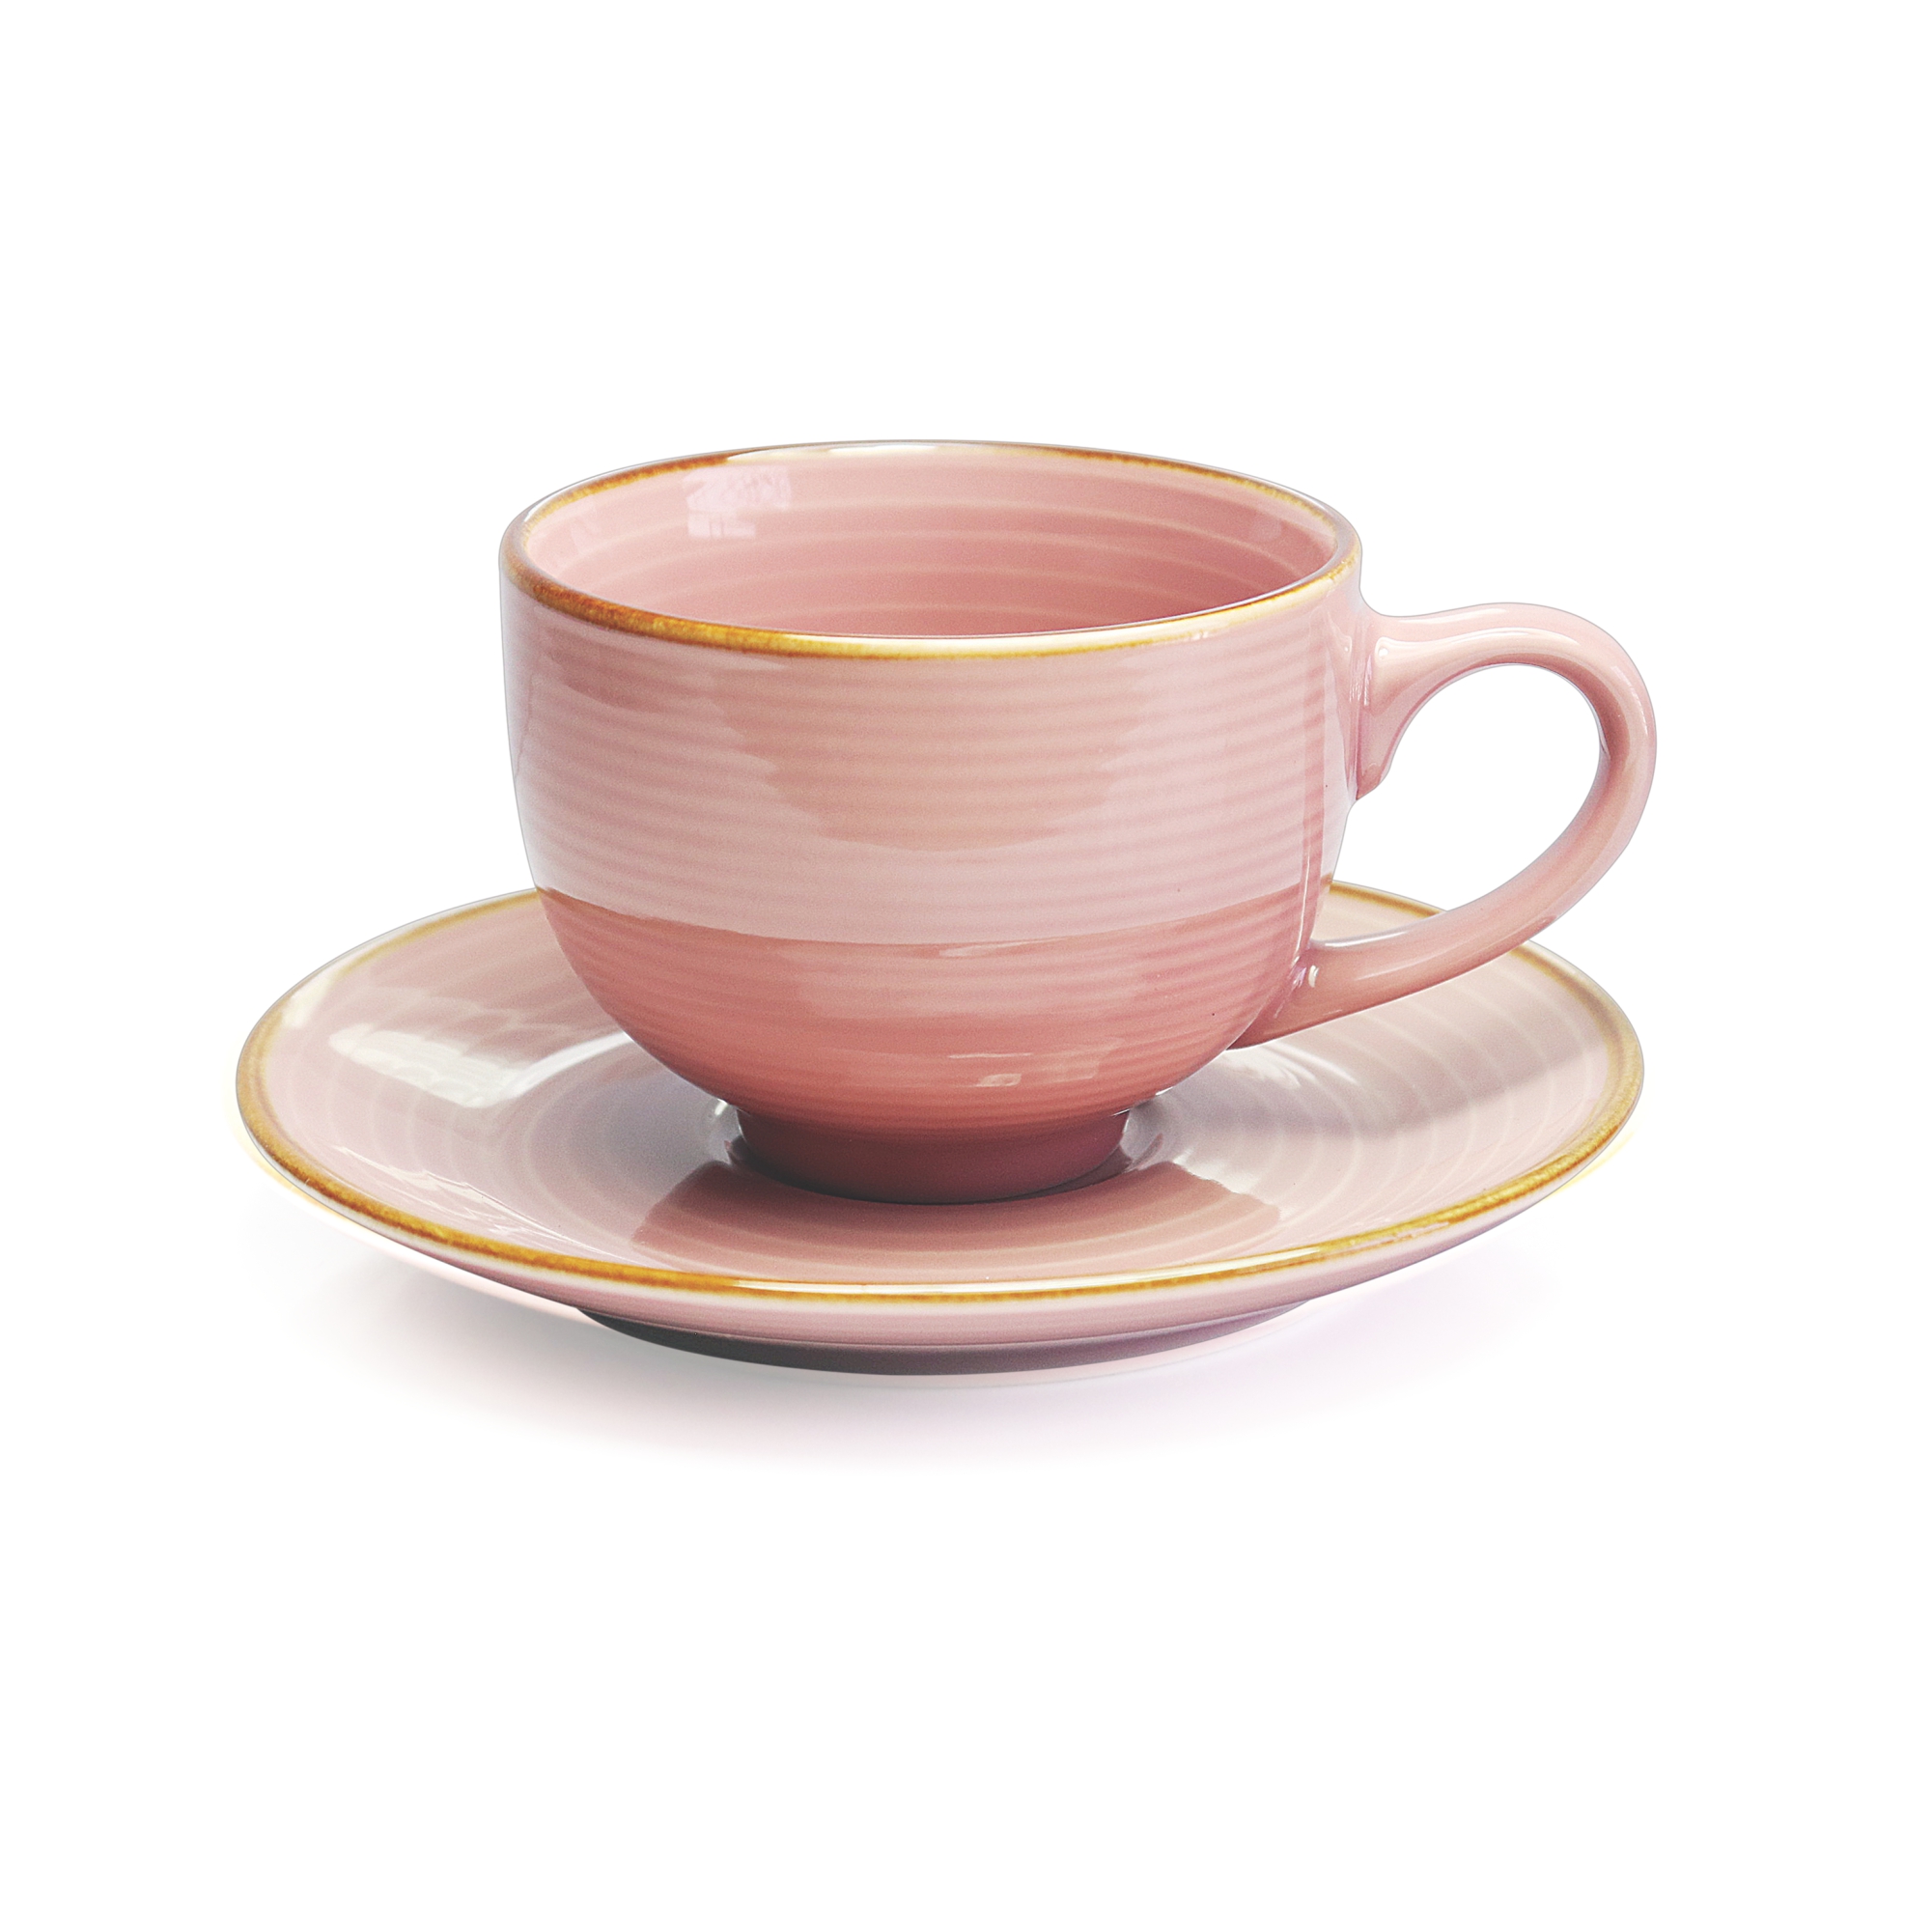 Buy Eclat Cup N Saucer 12 PCS Set Online - Treo by Milton